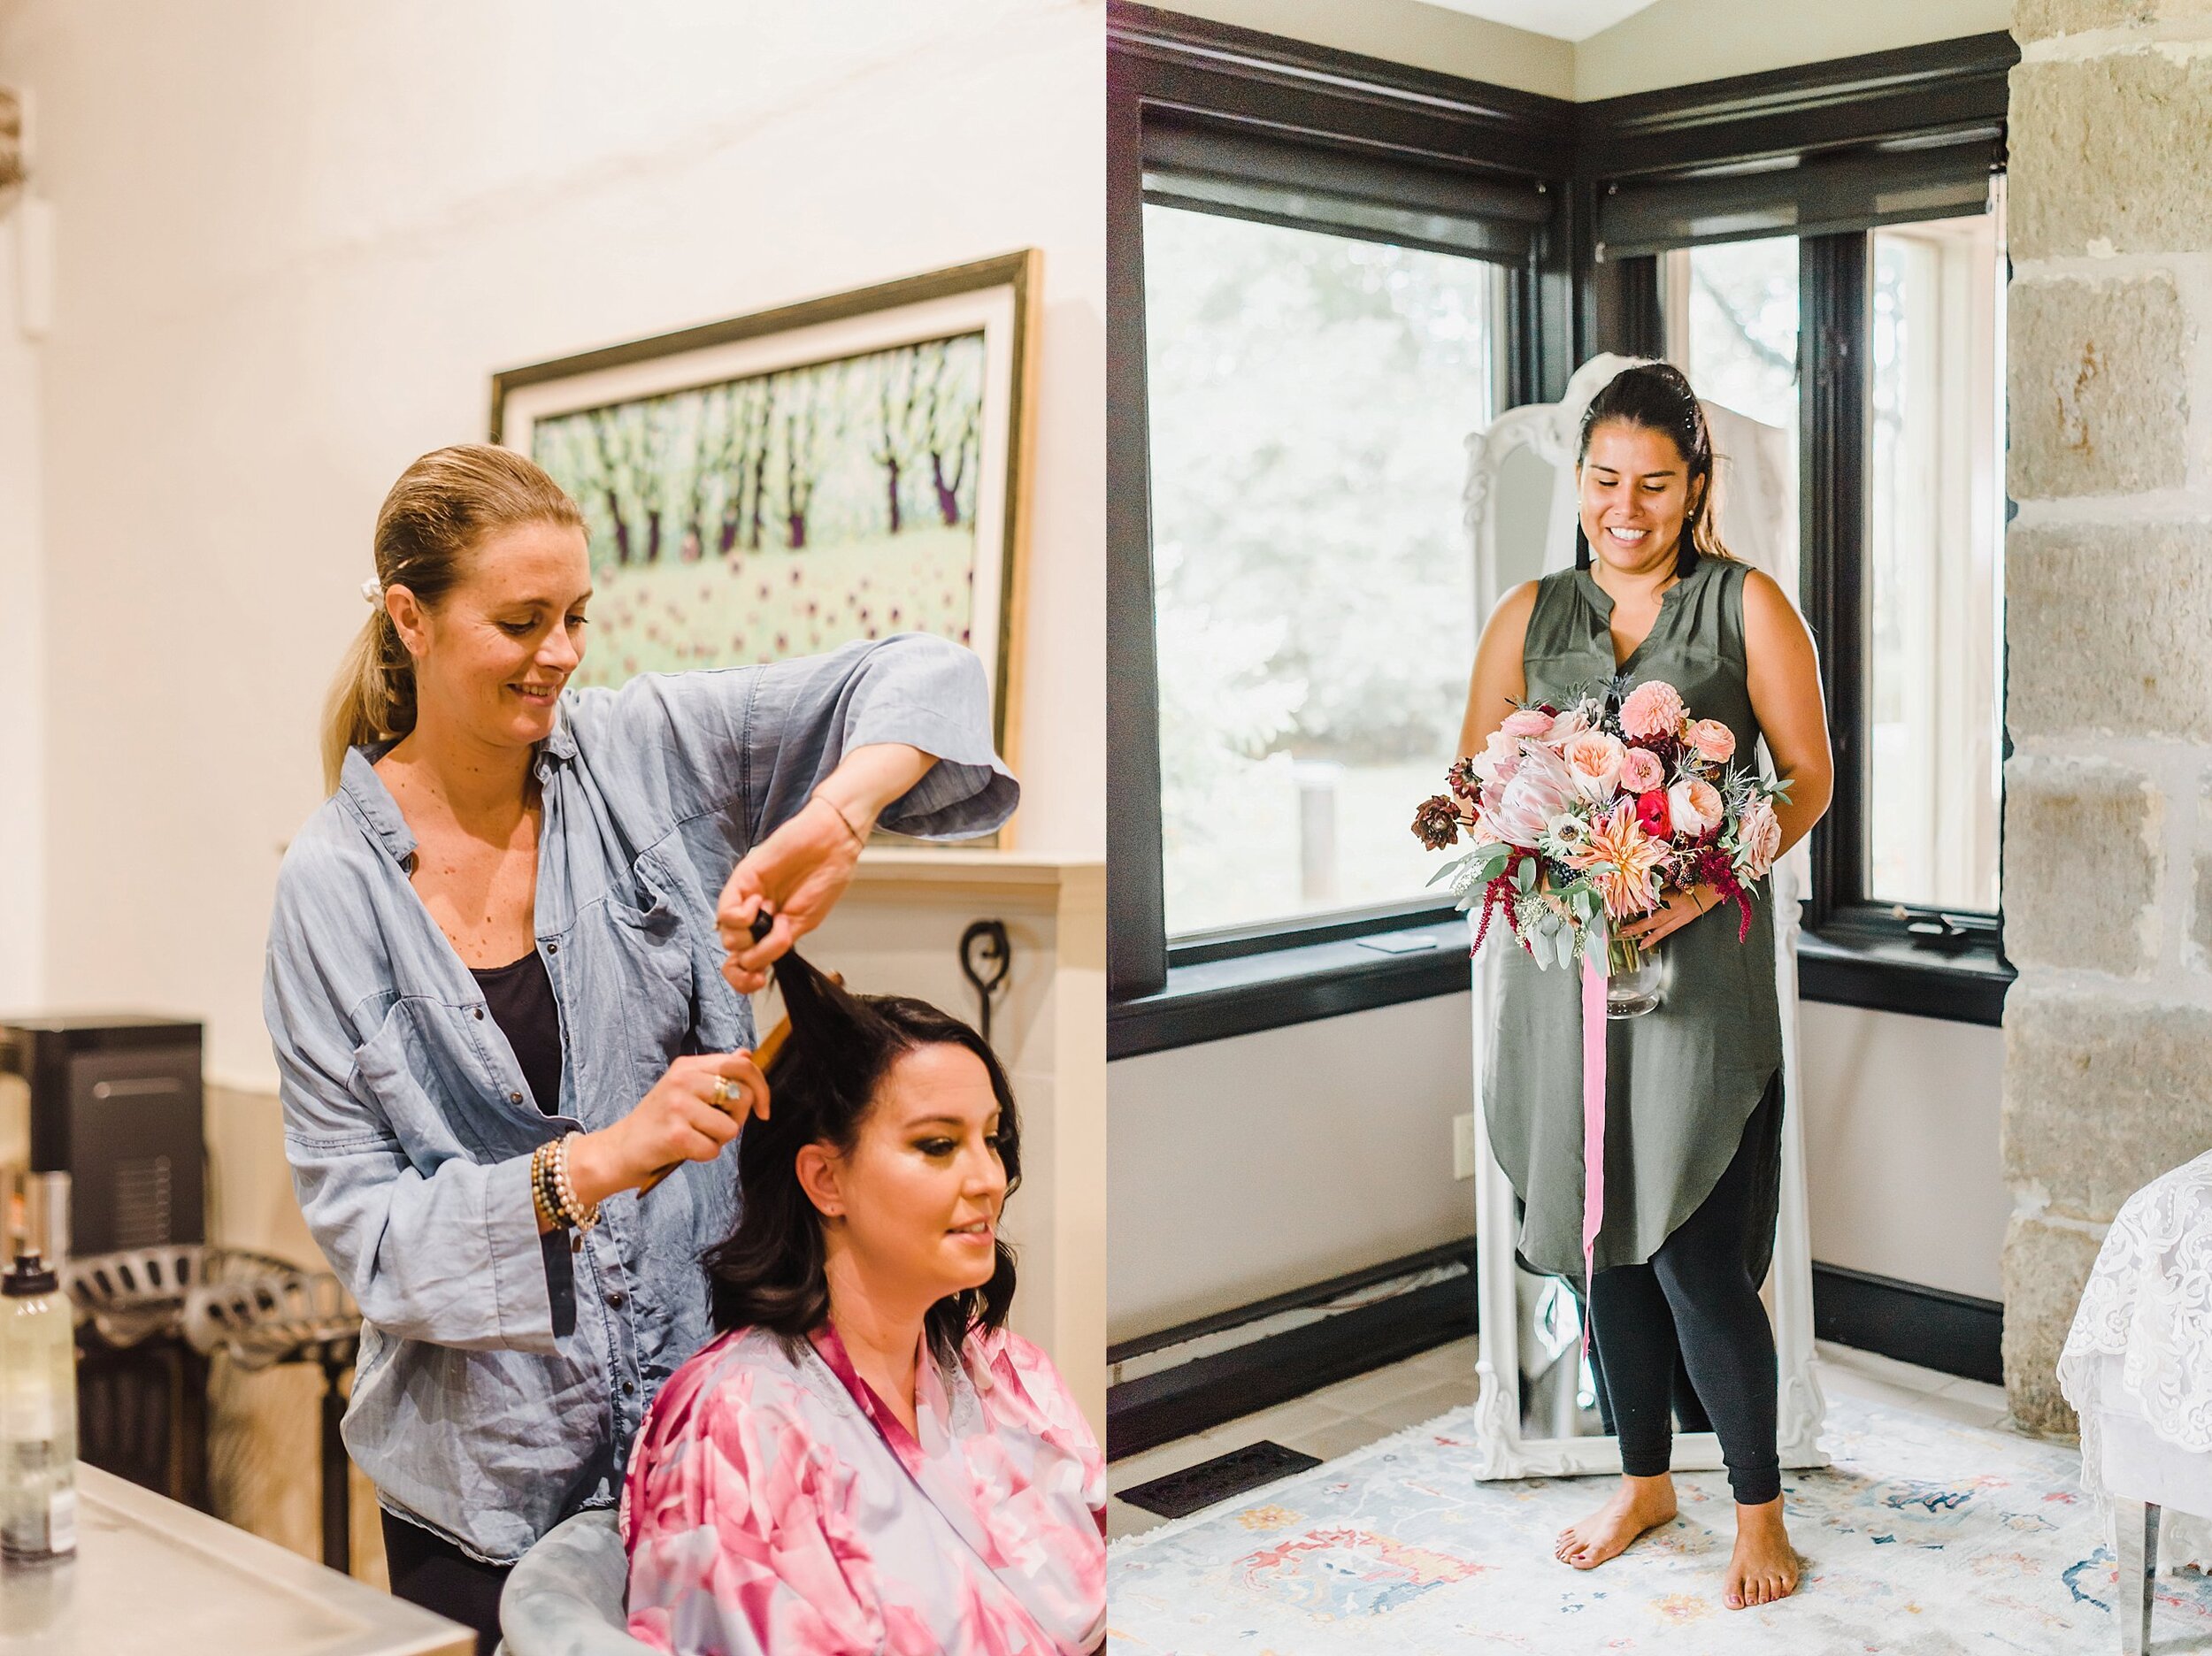  Now we gotta give it up to the hairstylists, florists and makeup artists!  Kirsty from Topknot Hairstylist and Carla of Capital Florist did an incredible job at Val and Paul’s Evermore wedding. 